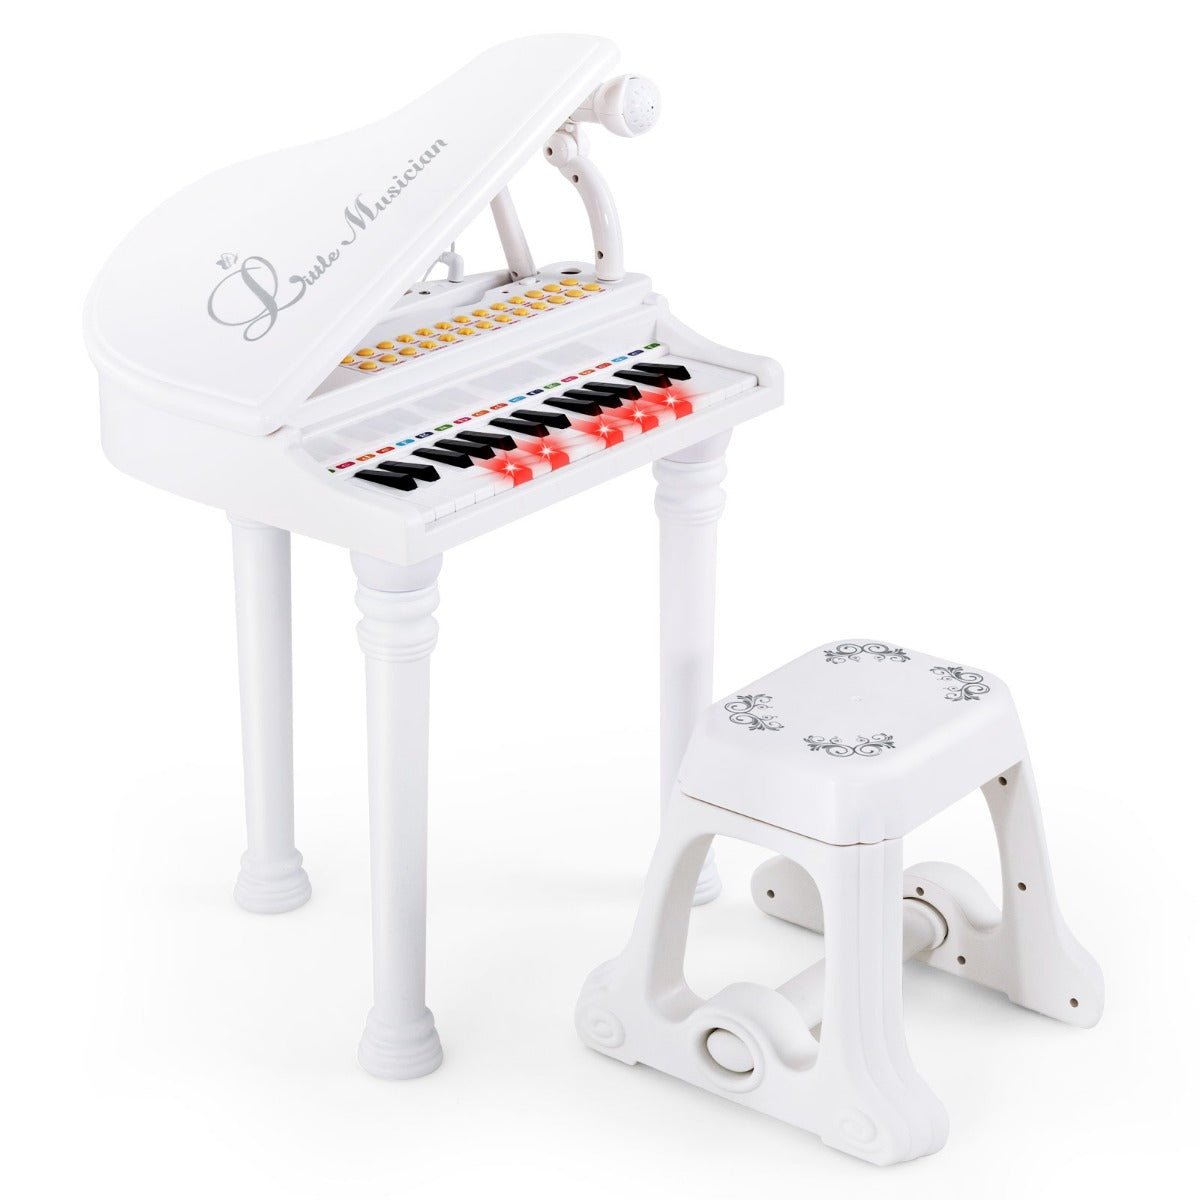 Shop the White 31-Key Kids Piano Keyboard with Stool and Microphone